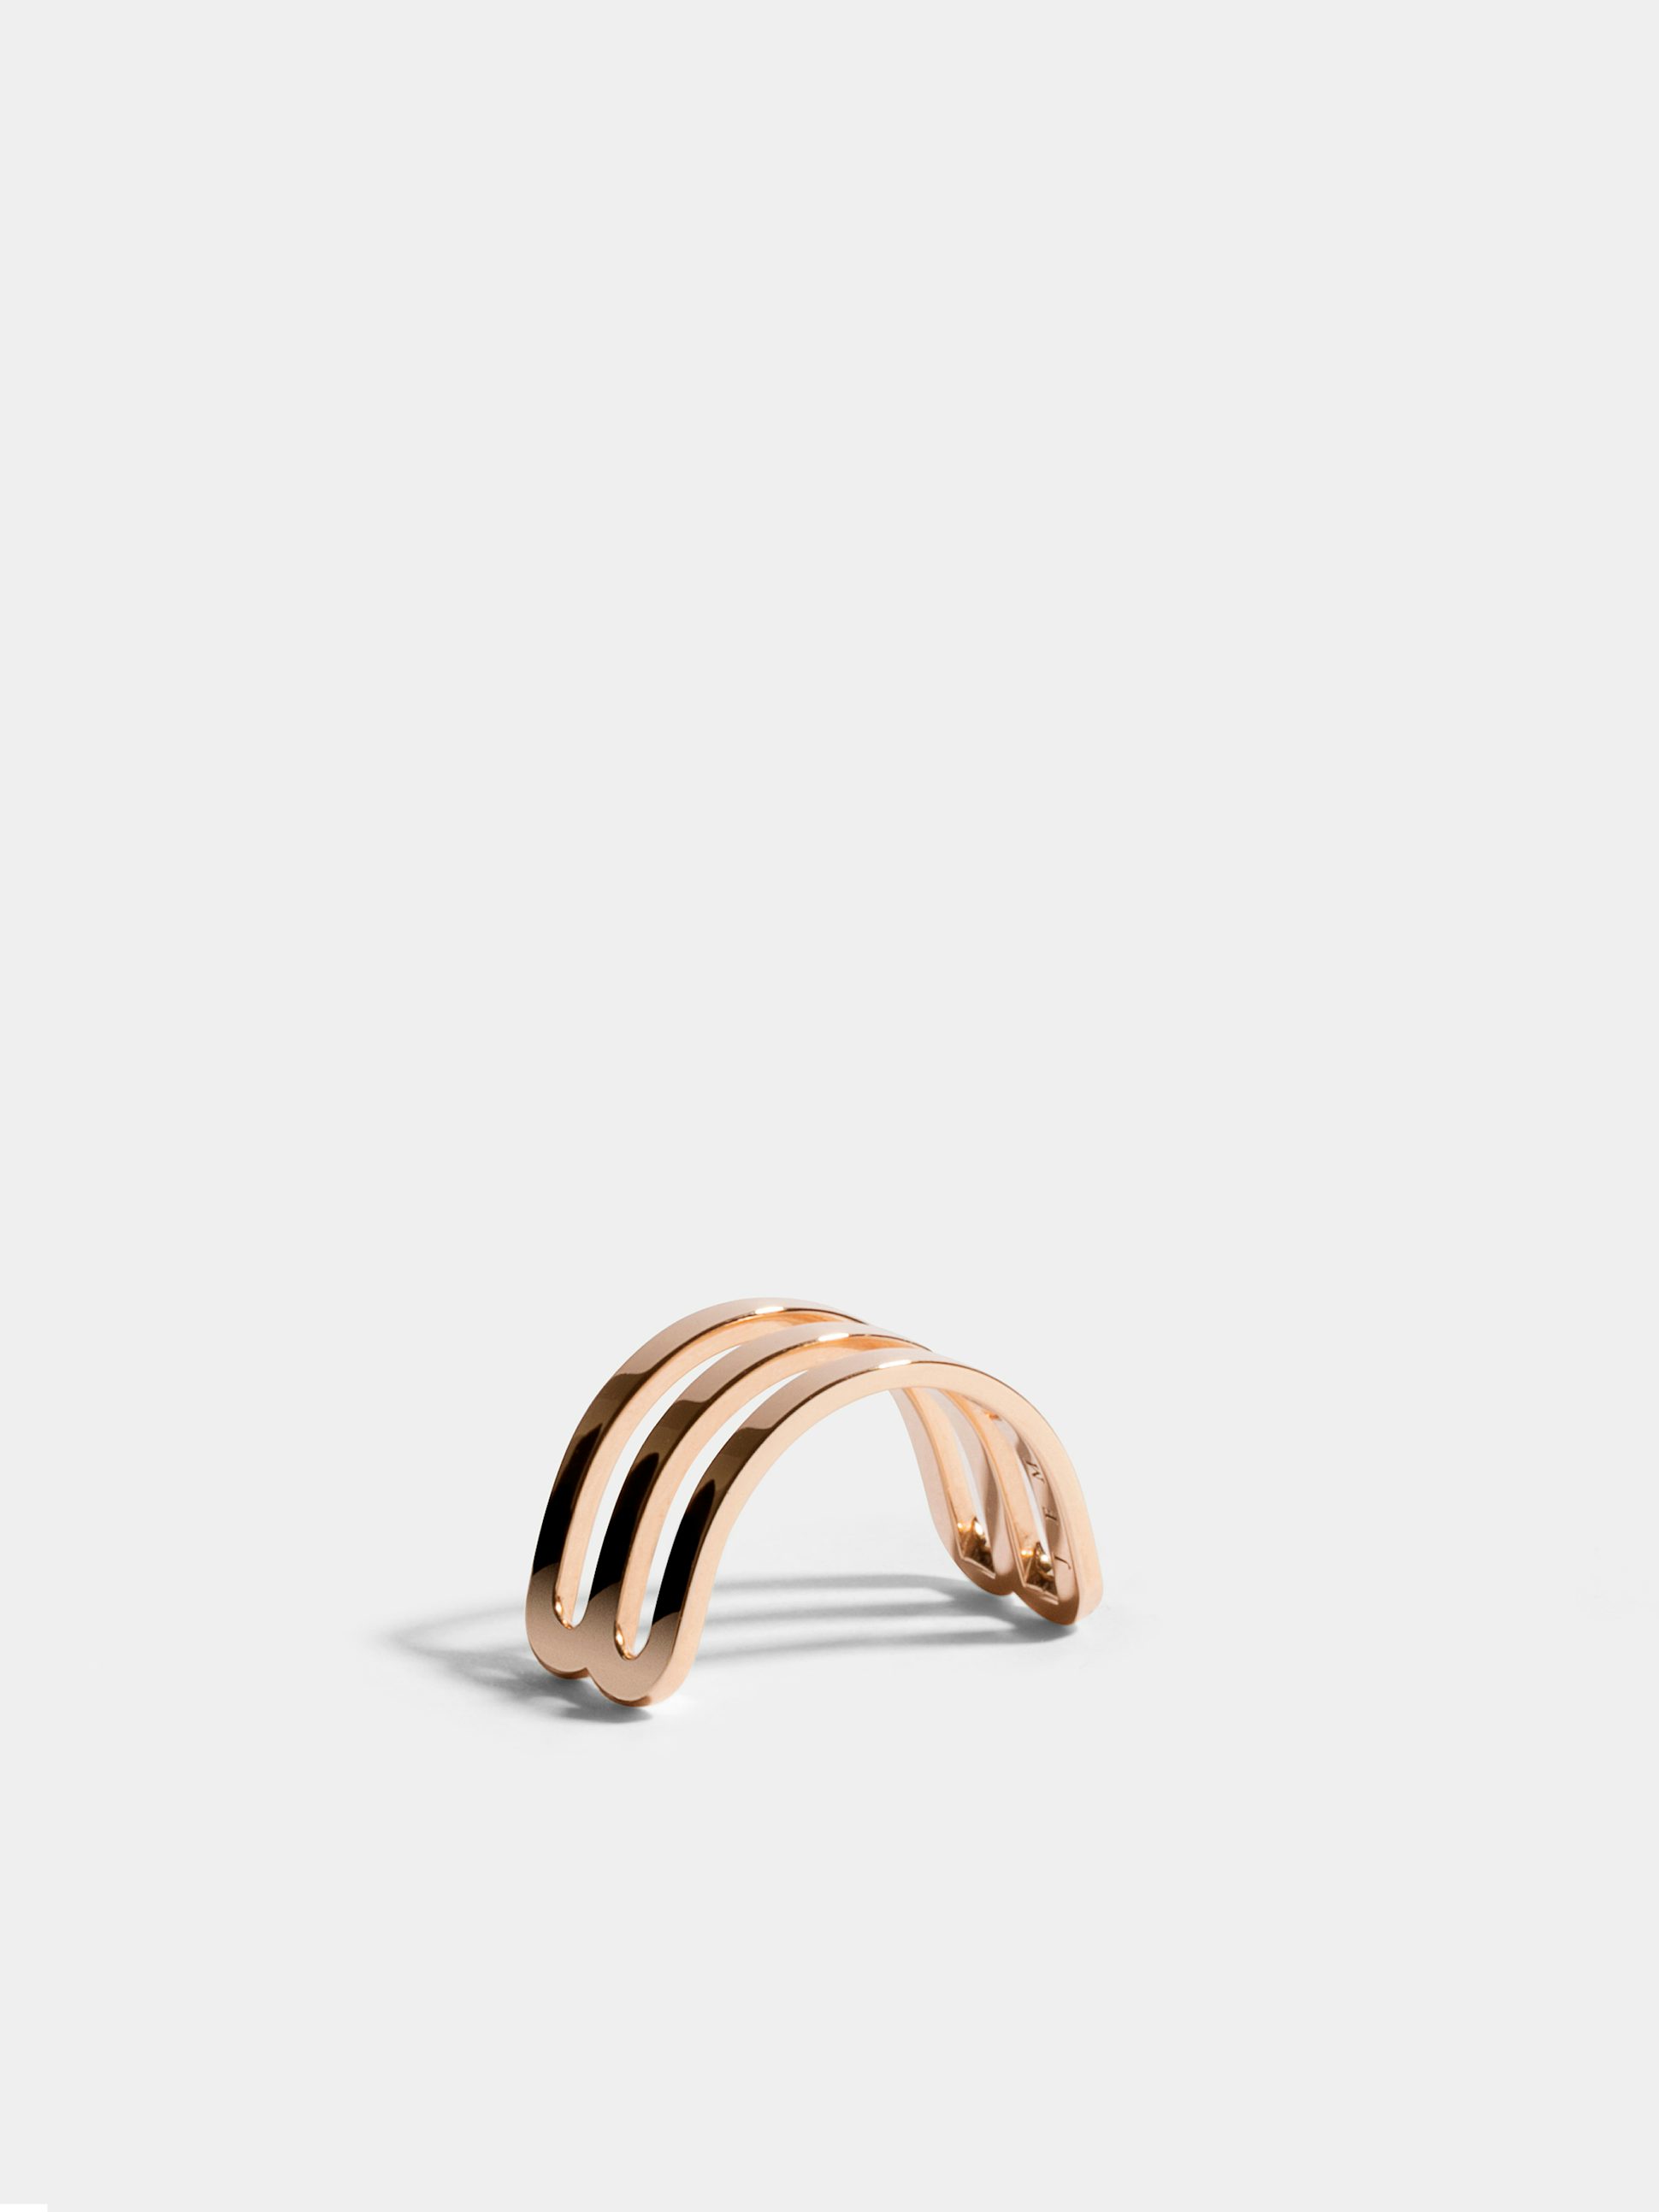 Étreintes double half-ring in 18k Fairmined ethical rose gold with a polished finish.